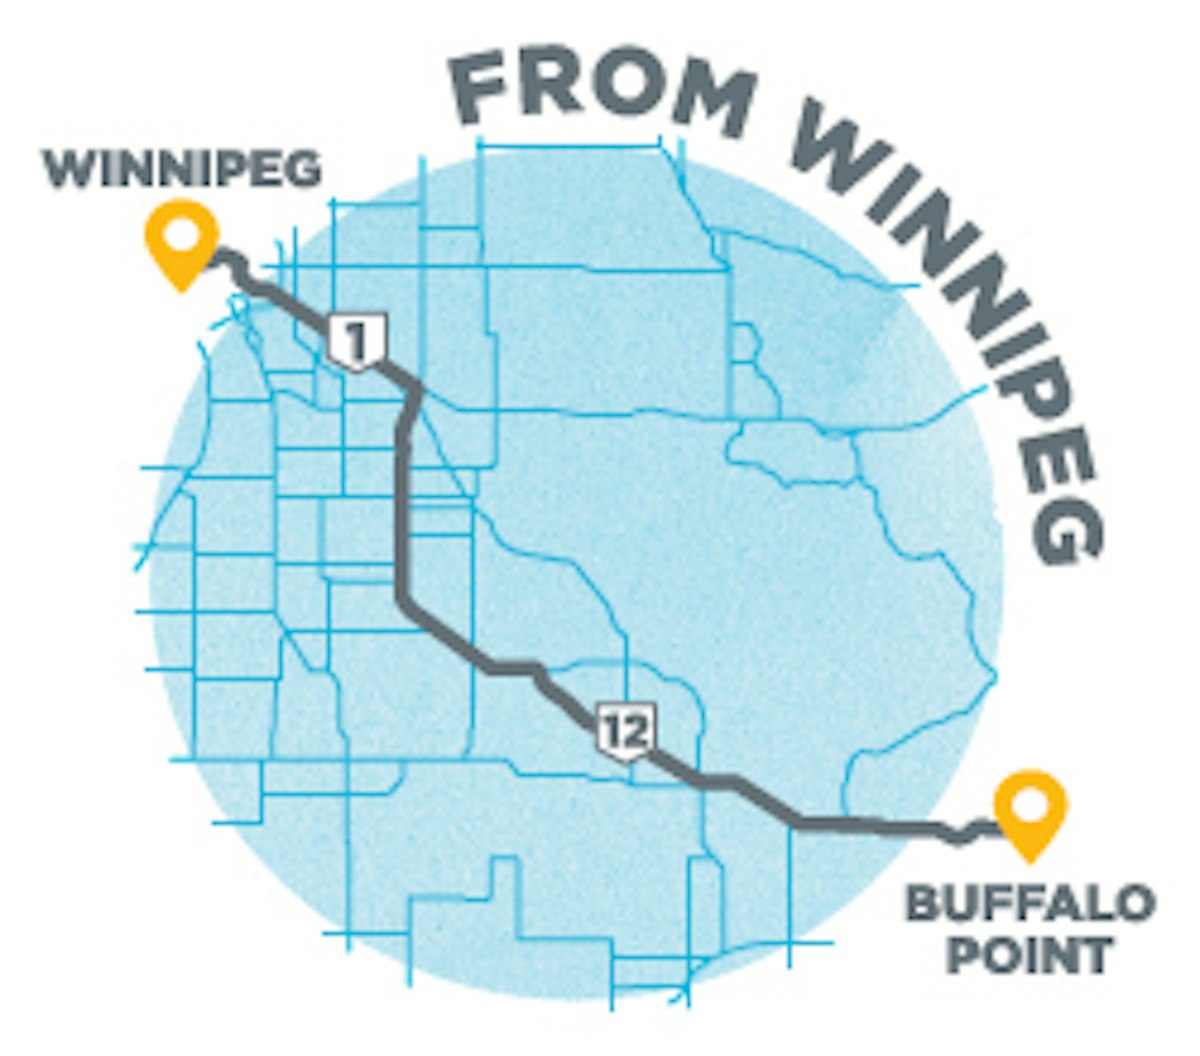 A map showing the route from winnipeg to buffalo point.